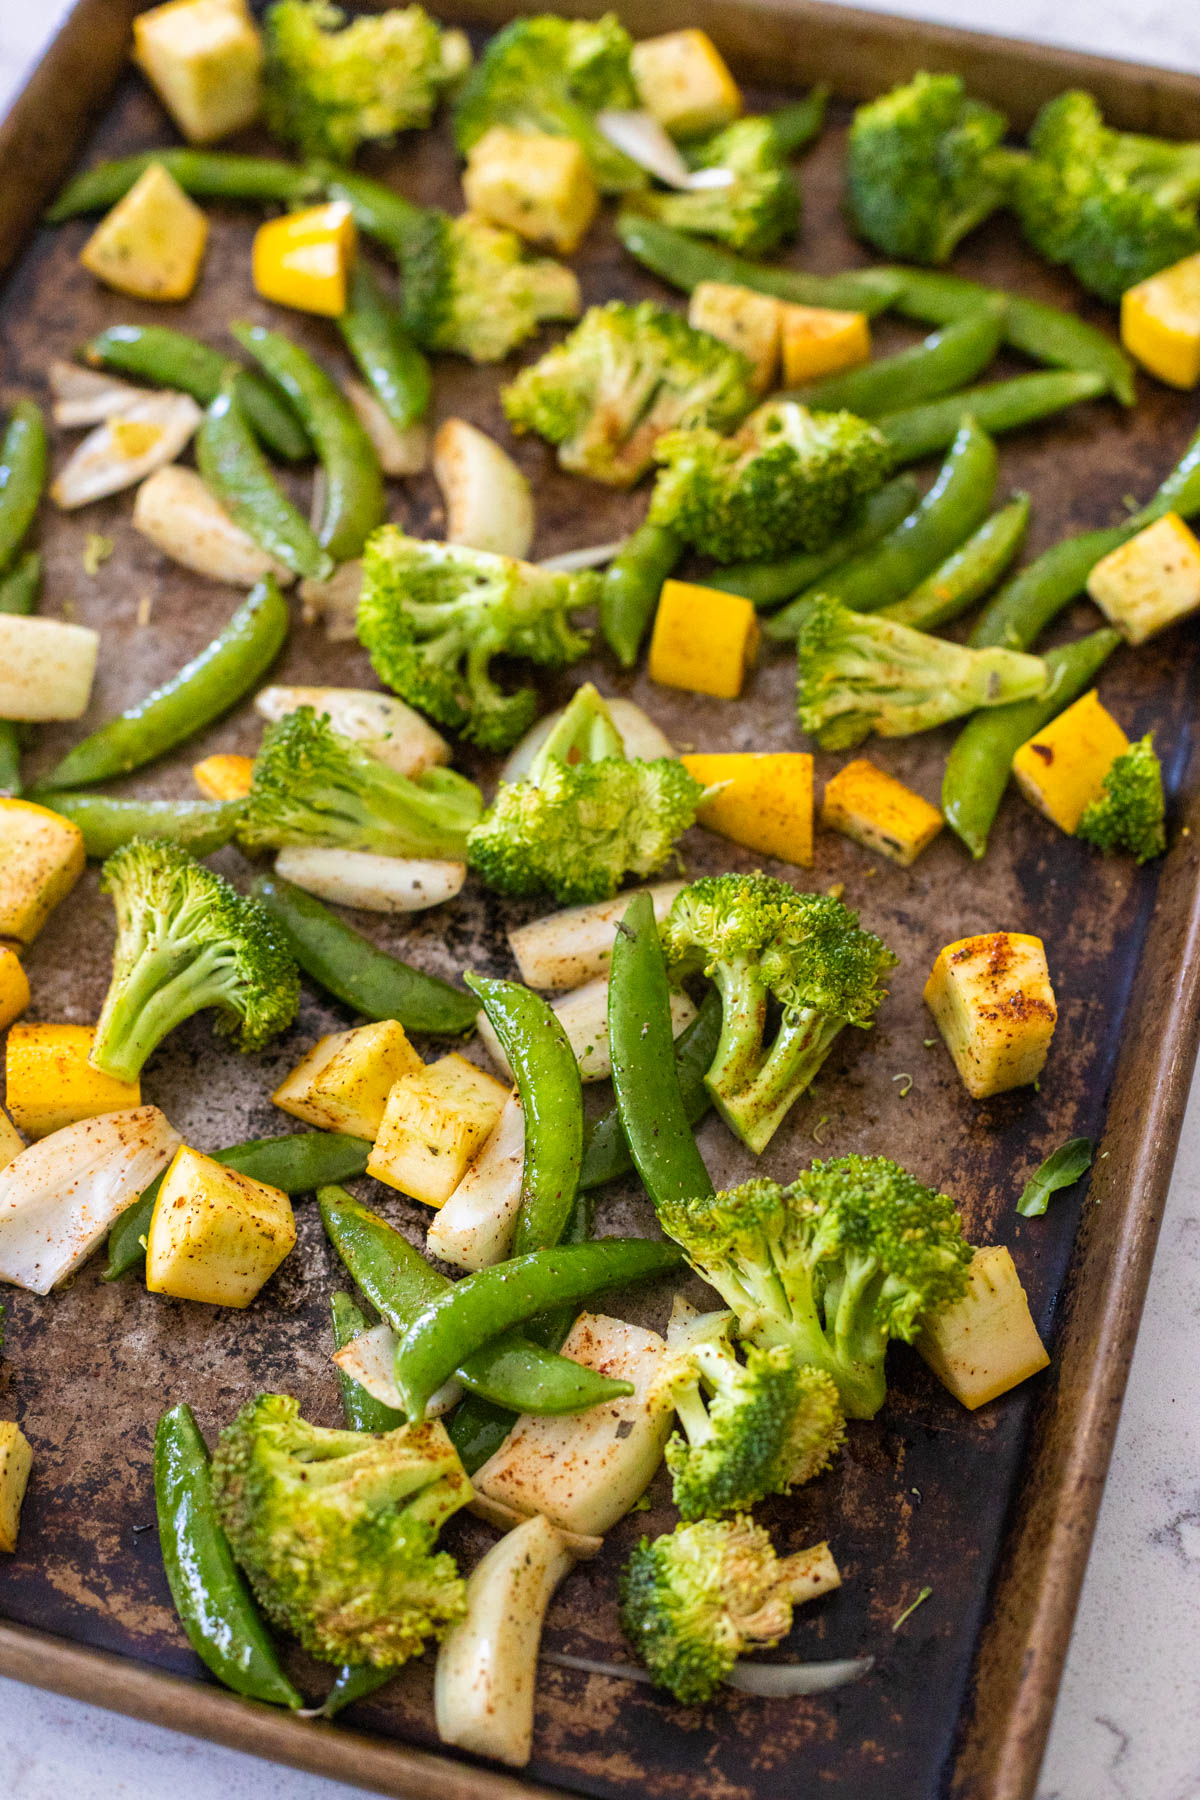 A sheet pan is filled with the seasoned veggies.